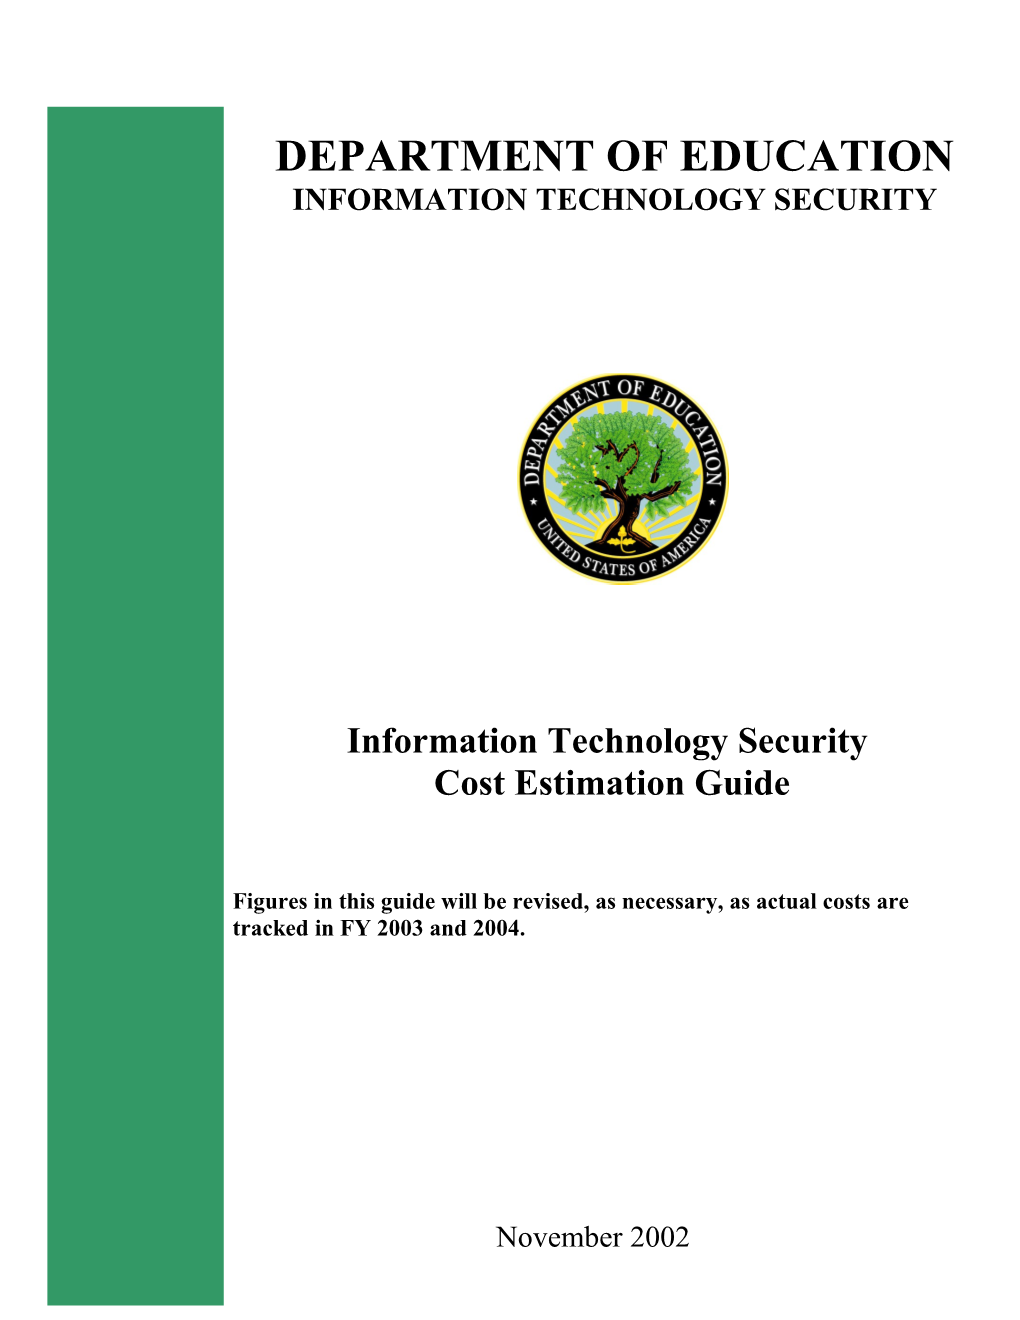 Department of Education IT Security Cost Estimation Guide